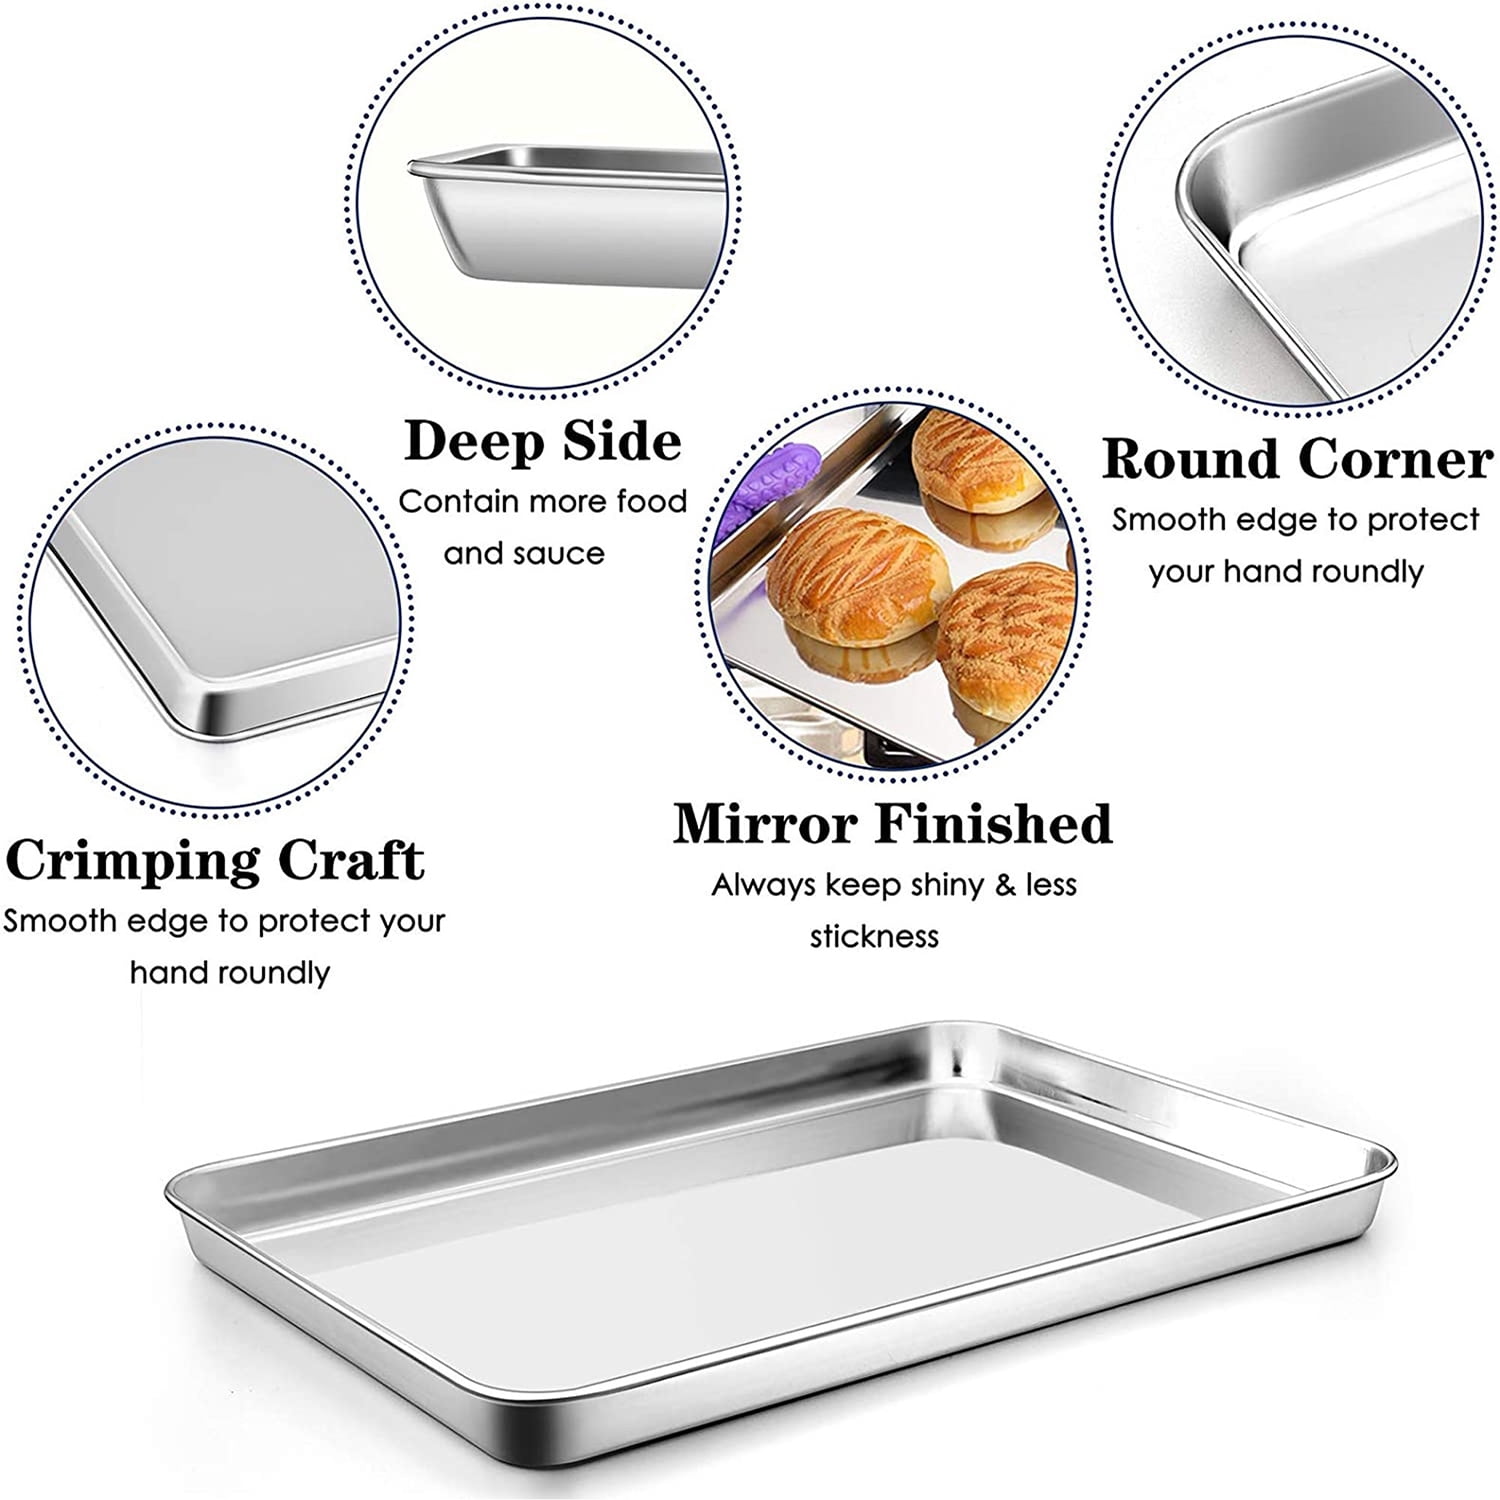 Herogo Stainless Steel Baking Pan Sheet with Cooling Rack Set, 16 x 12 x 1  Inch, Fluted Nonstick Bakeware Cookies Sheet Tray for Oven Baking, Rust